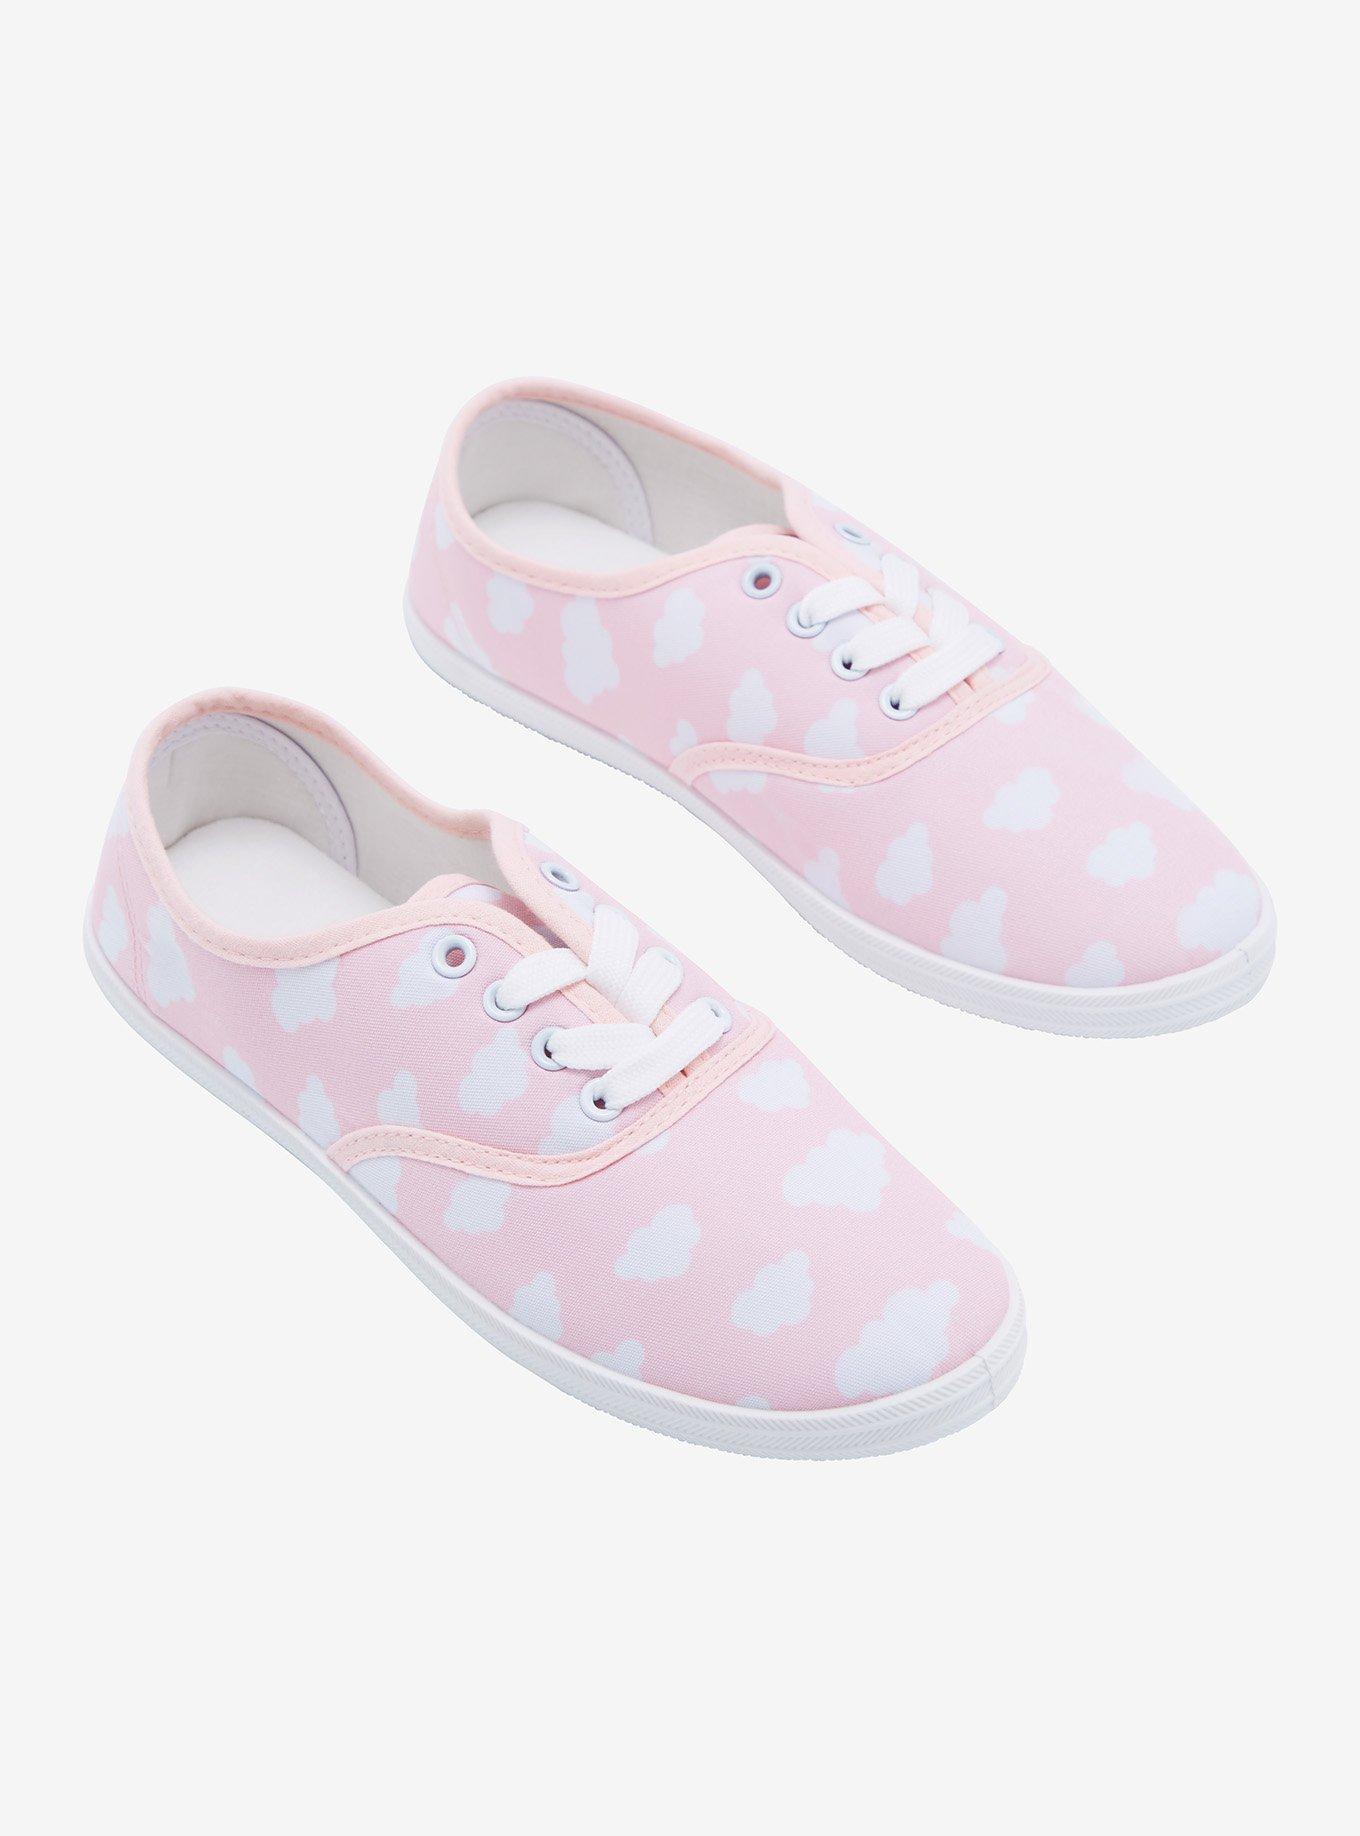 Pink Cloud Lace-Up Sneakers, MULTI, hi-res